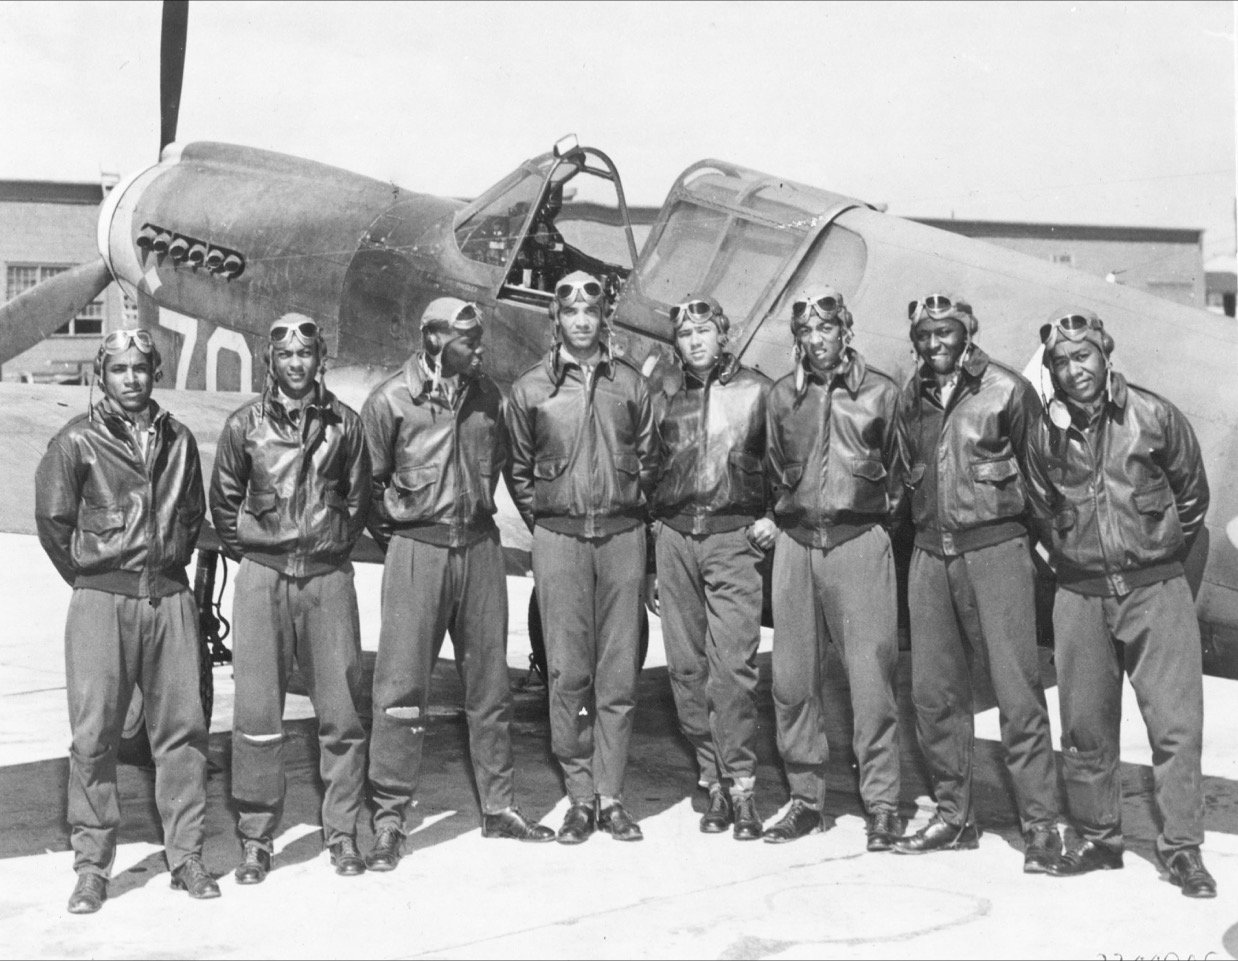 This Tuskegee Airmen photo was likely taken in Southern Italy or North Africa. Its original caption reads, “Class 42-I graduated from flight training on October 9, 1942 at Tuskegee Army Air Field in Alabama. Left to right: Nathaniel M. Hill, Marshall S. Cabiness, Herman A. Lawson, William T. Mattison, John A. Gibson, Elwood T Driver, Price D. Rice, Andrew D. Turner.”